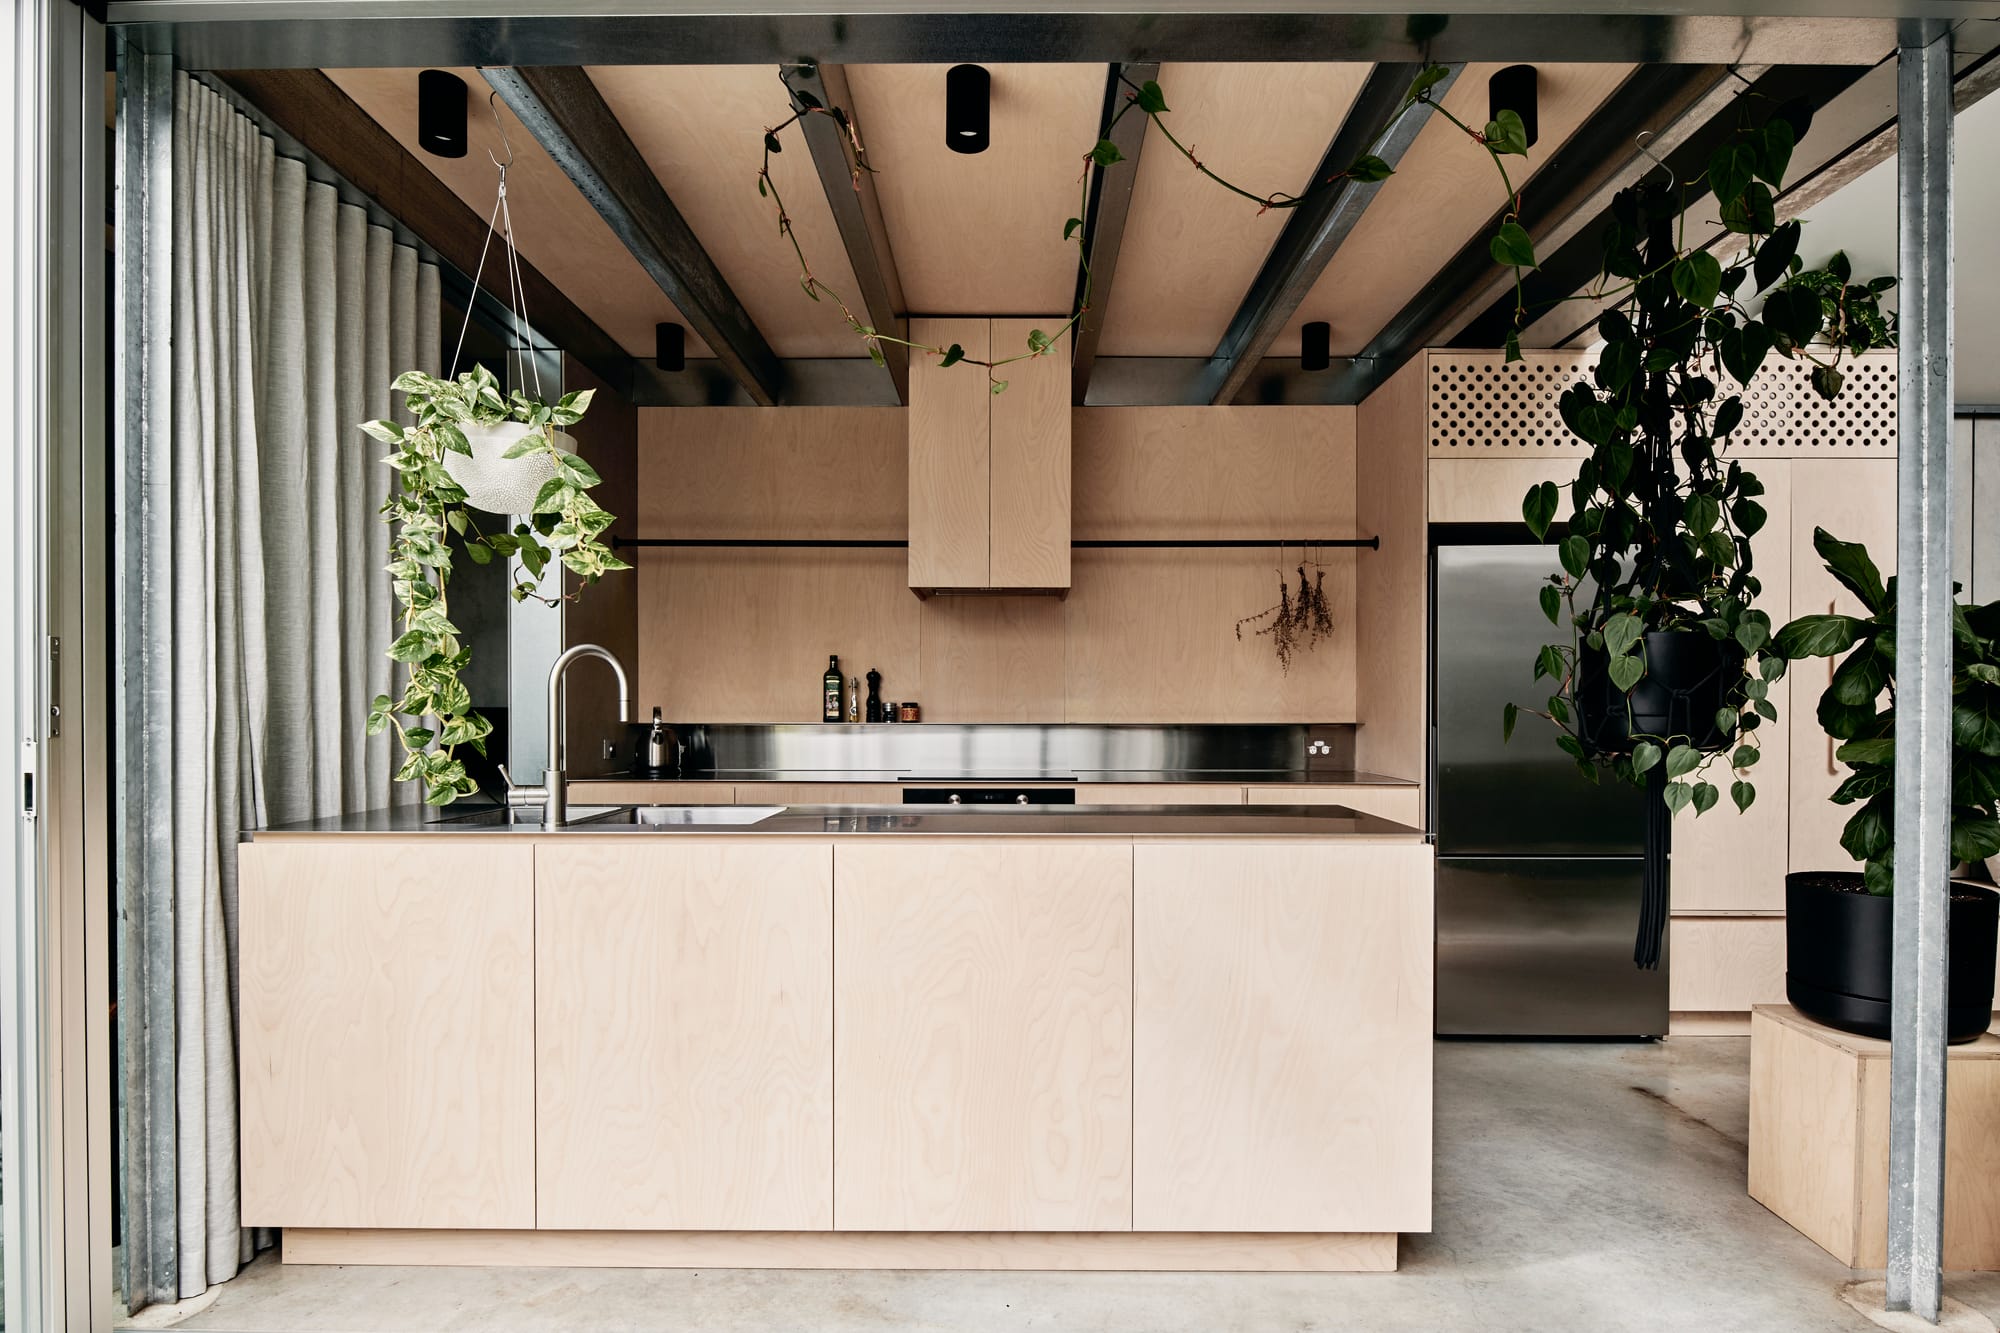 That Old Chestnut by FIGR. Architecture & Design. Photography by Tom Blachford. Landscape image of industrial kitchen with plywood cabinetry, concrete floors and exposed steel beams. Lots of hanging plants. 